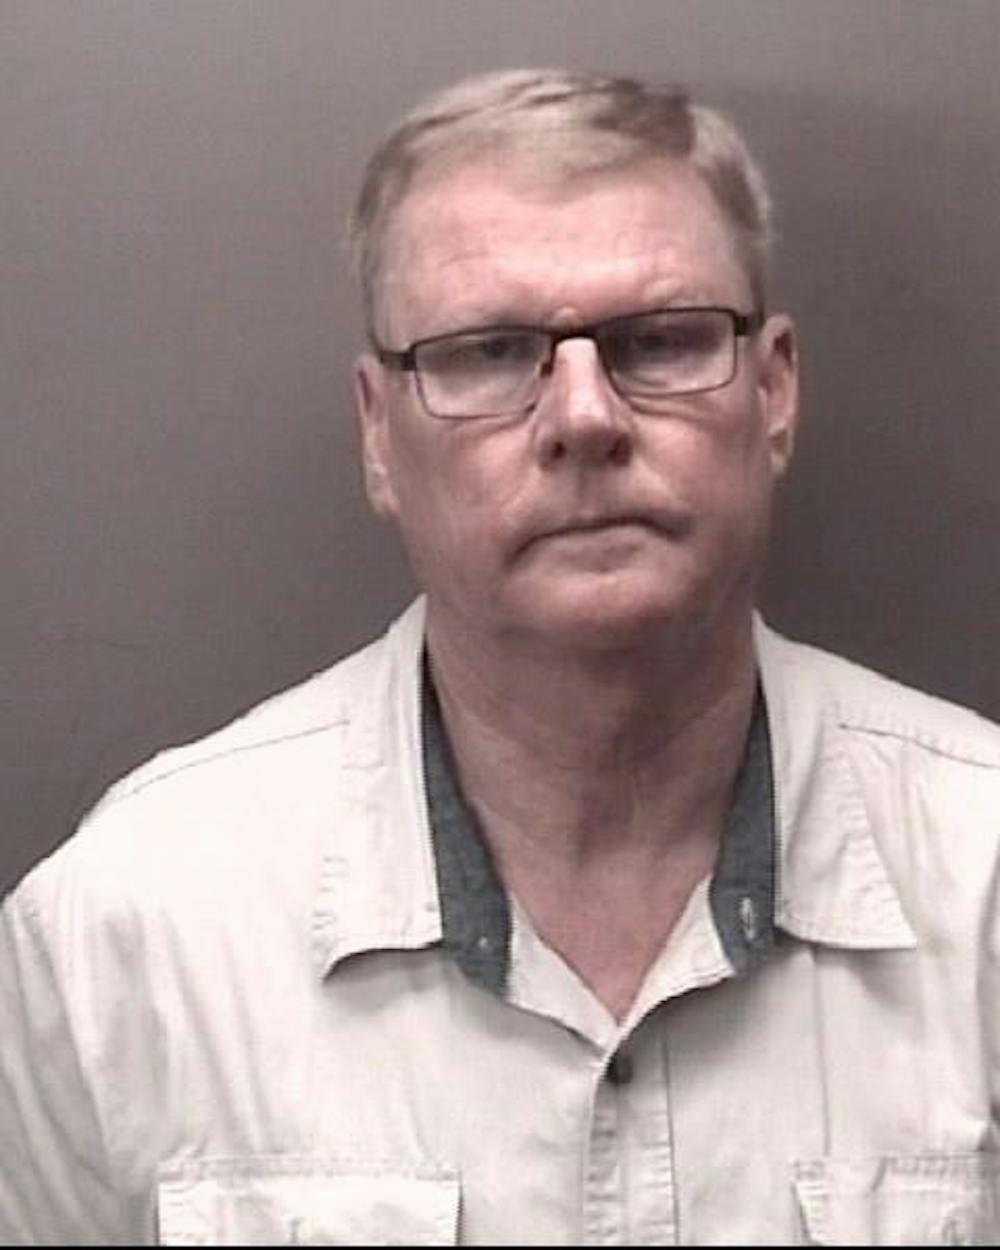 Harold Bowden was arrested for 20 counts of child exploitation and one count of possession of a firearm as a felon.